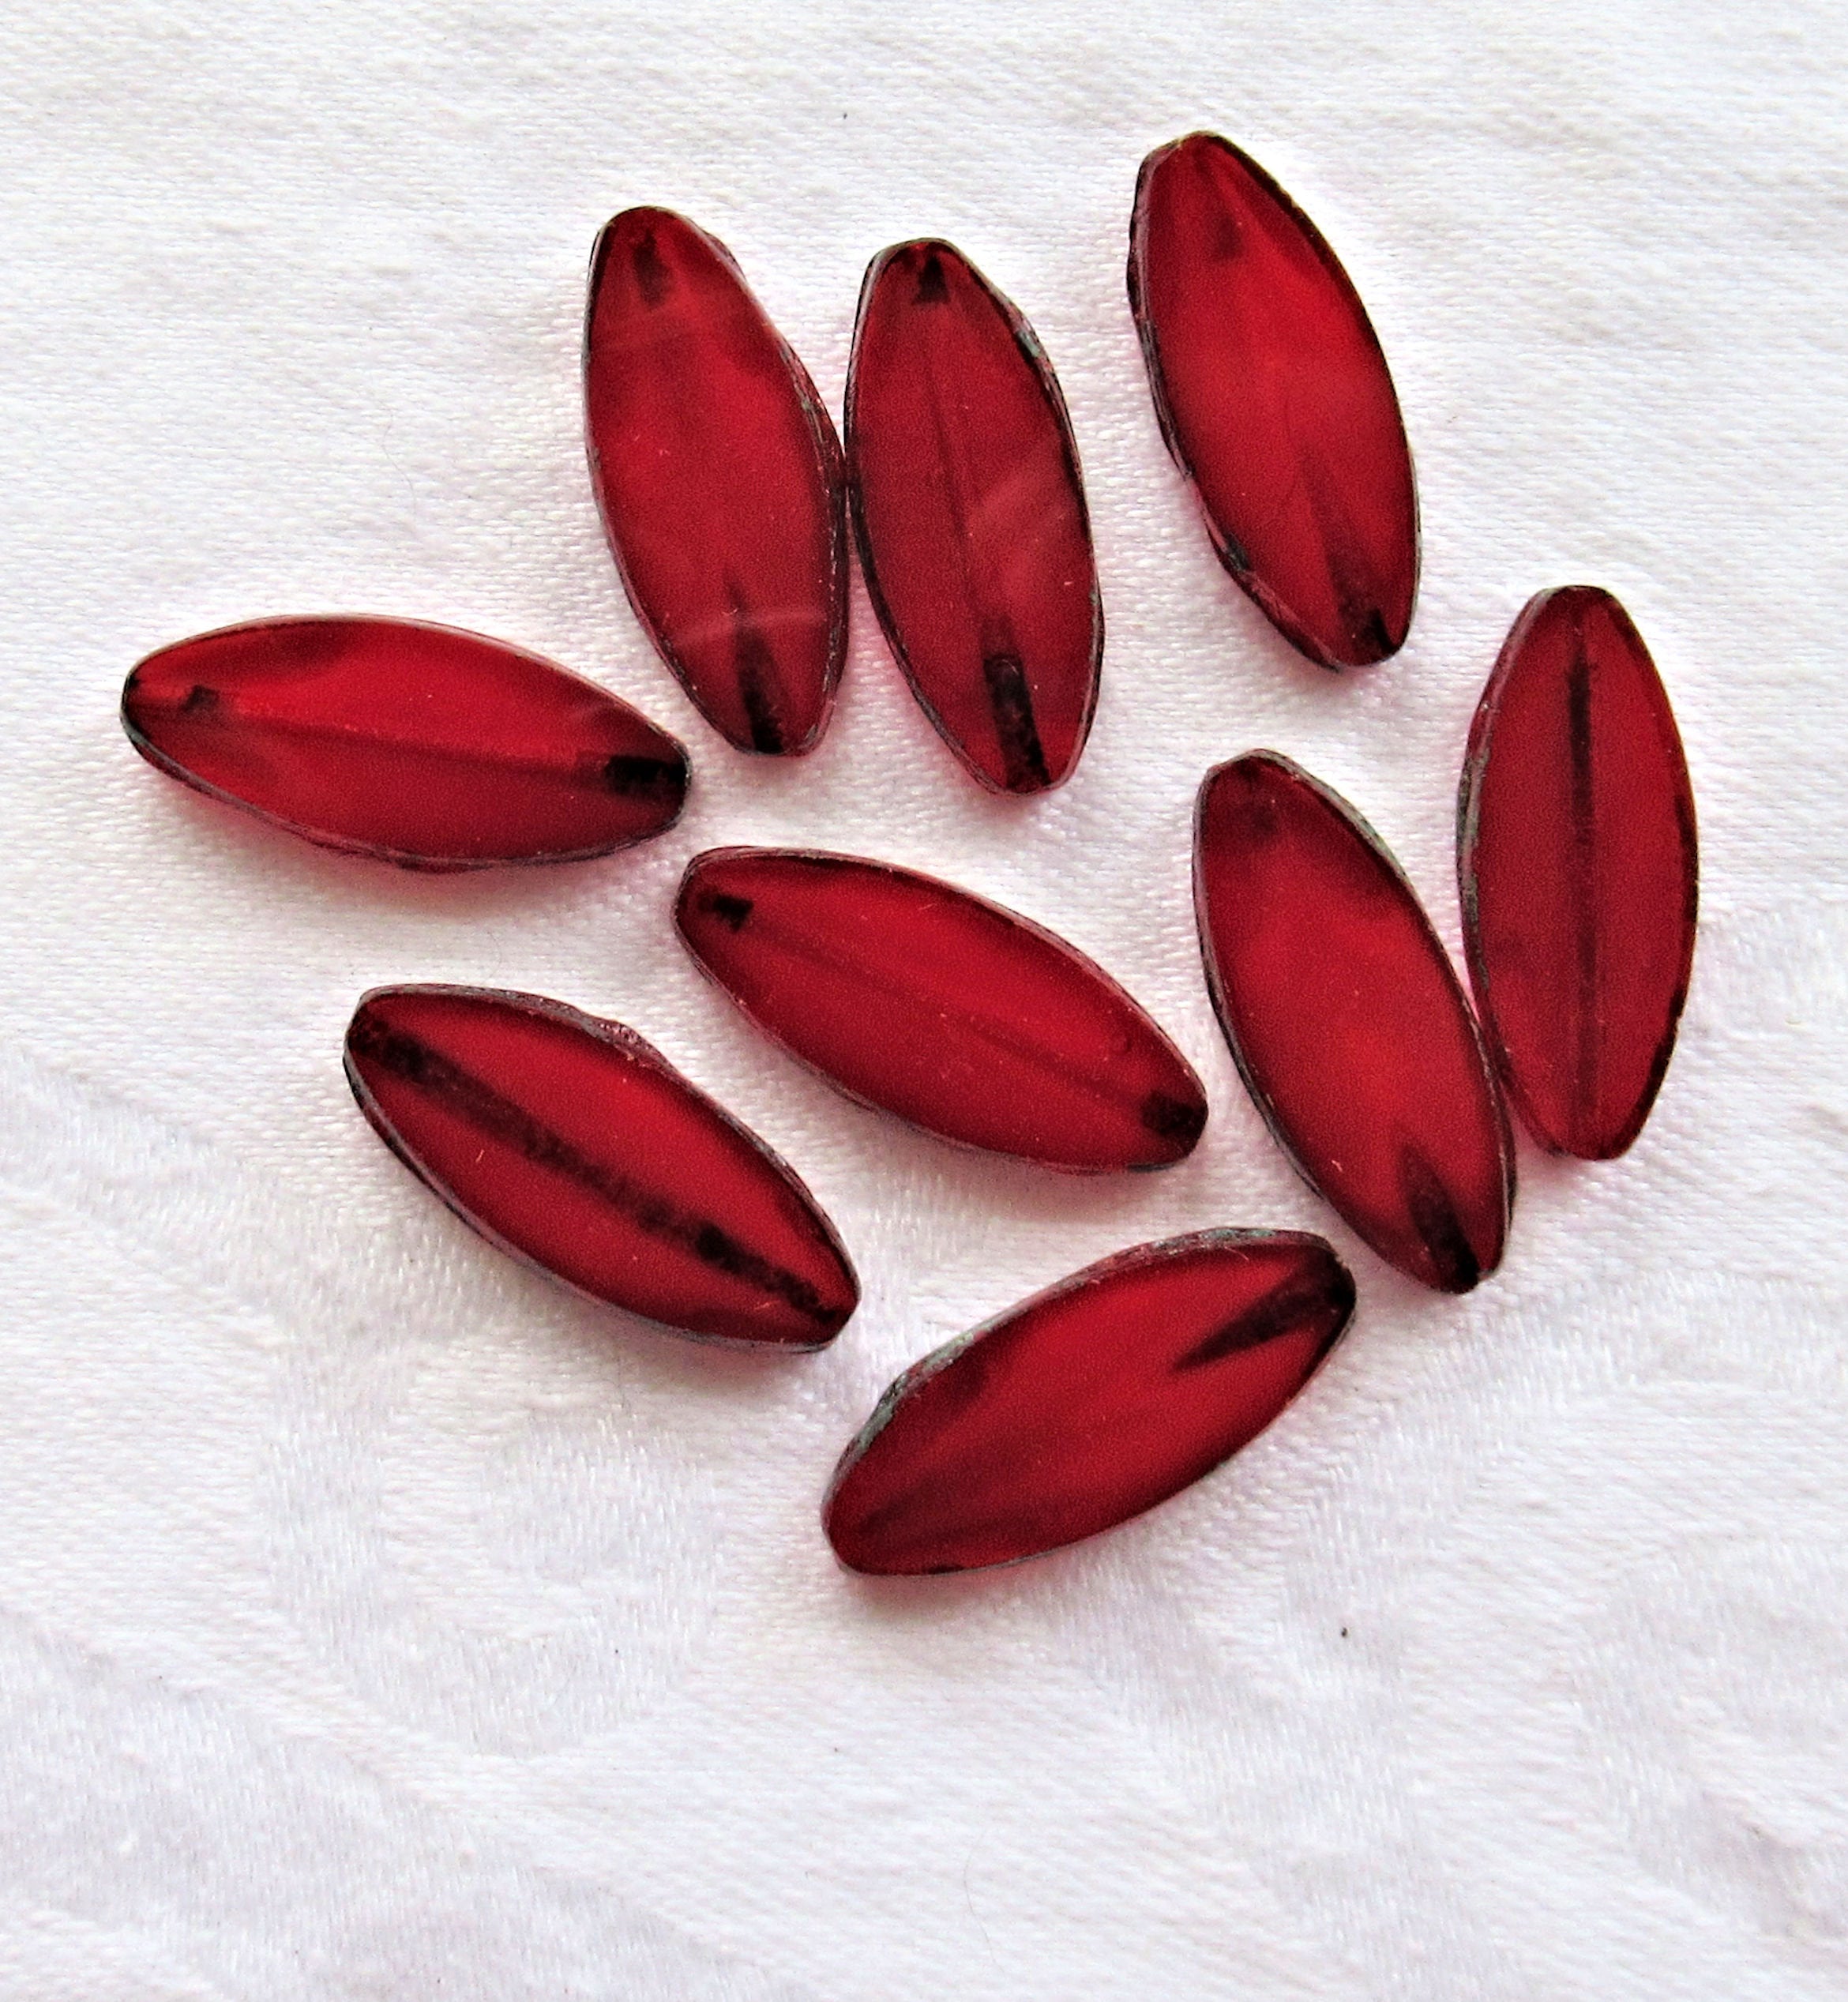 Antique Glass Nailhead Beads - TSP Red Luster 5mm Round - Treefrog Beads